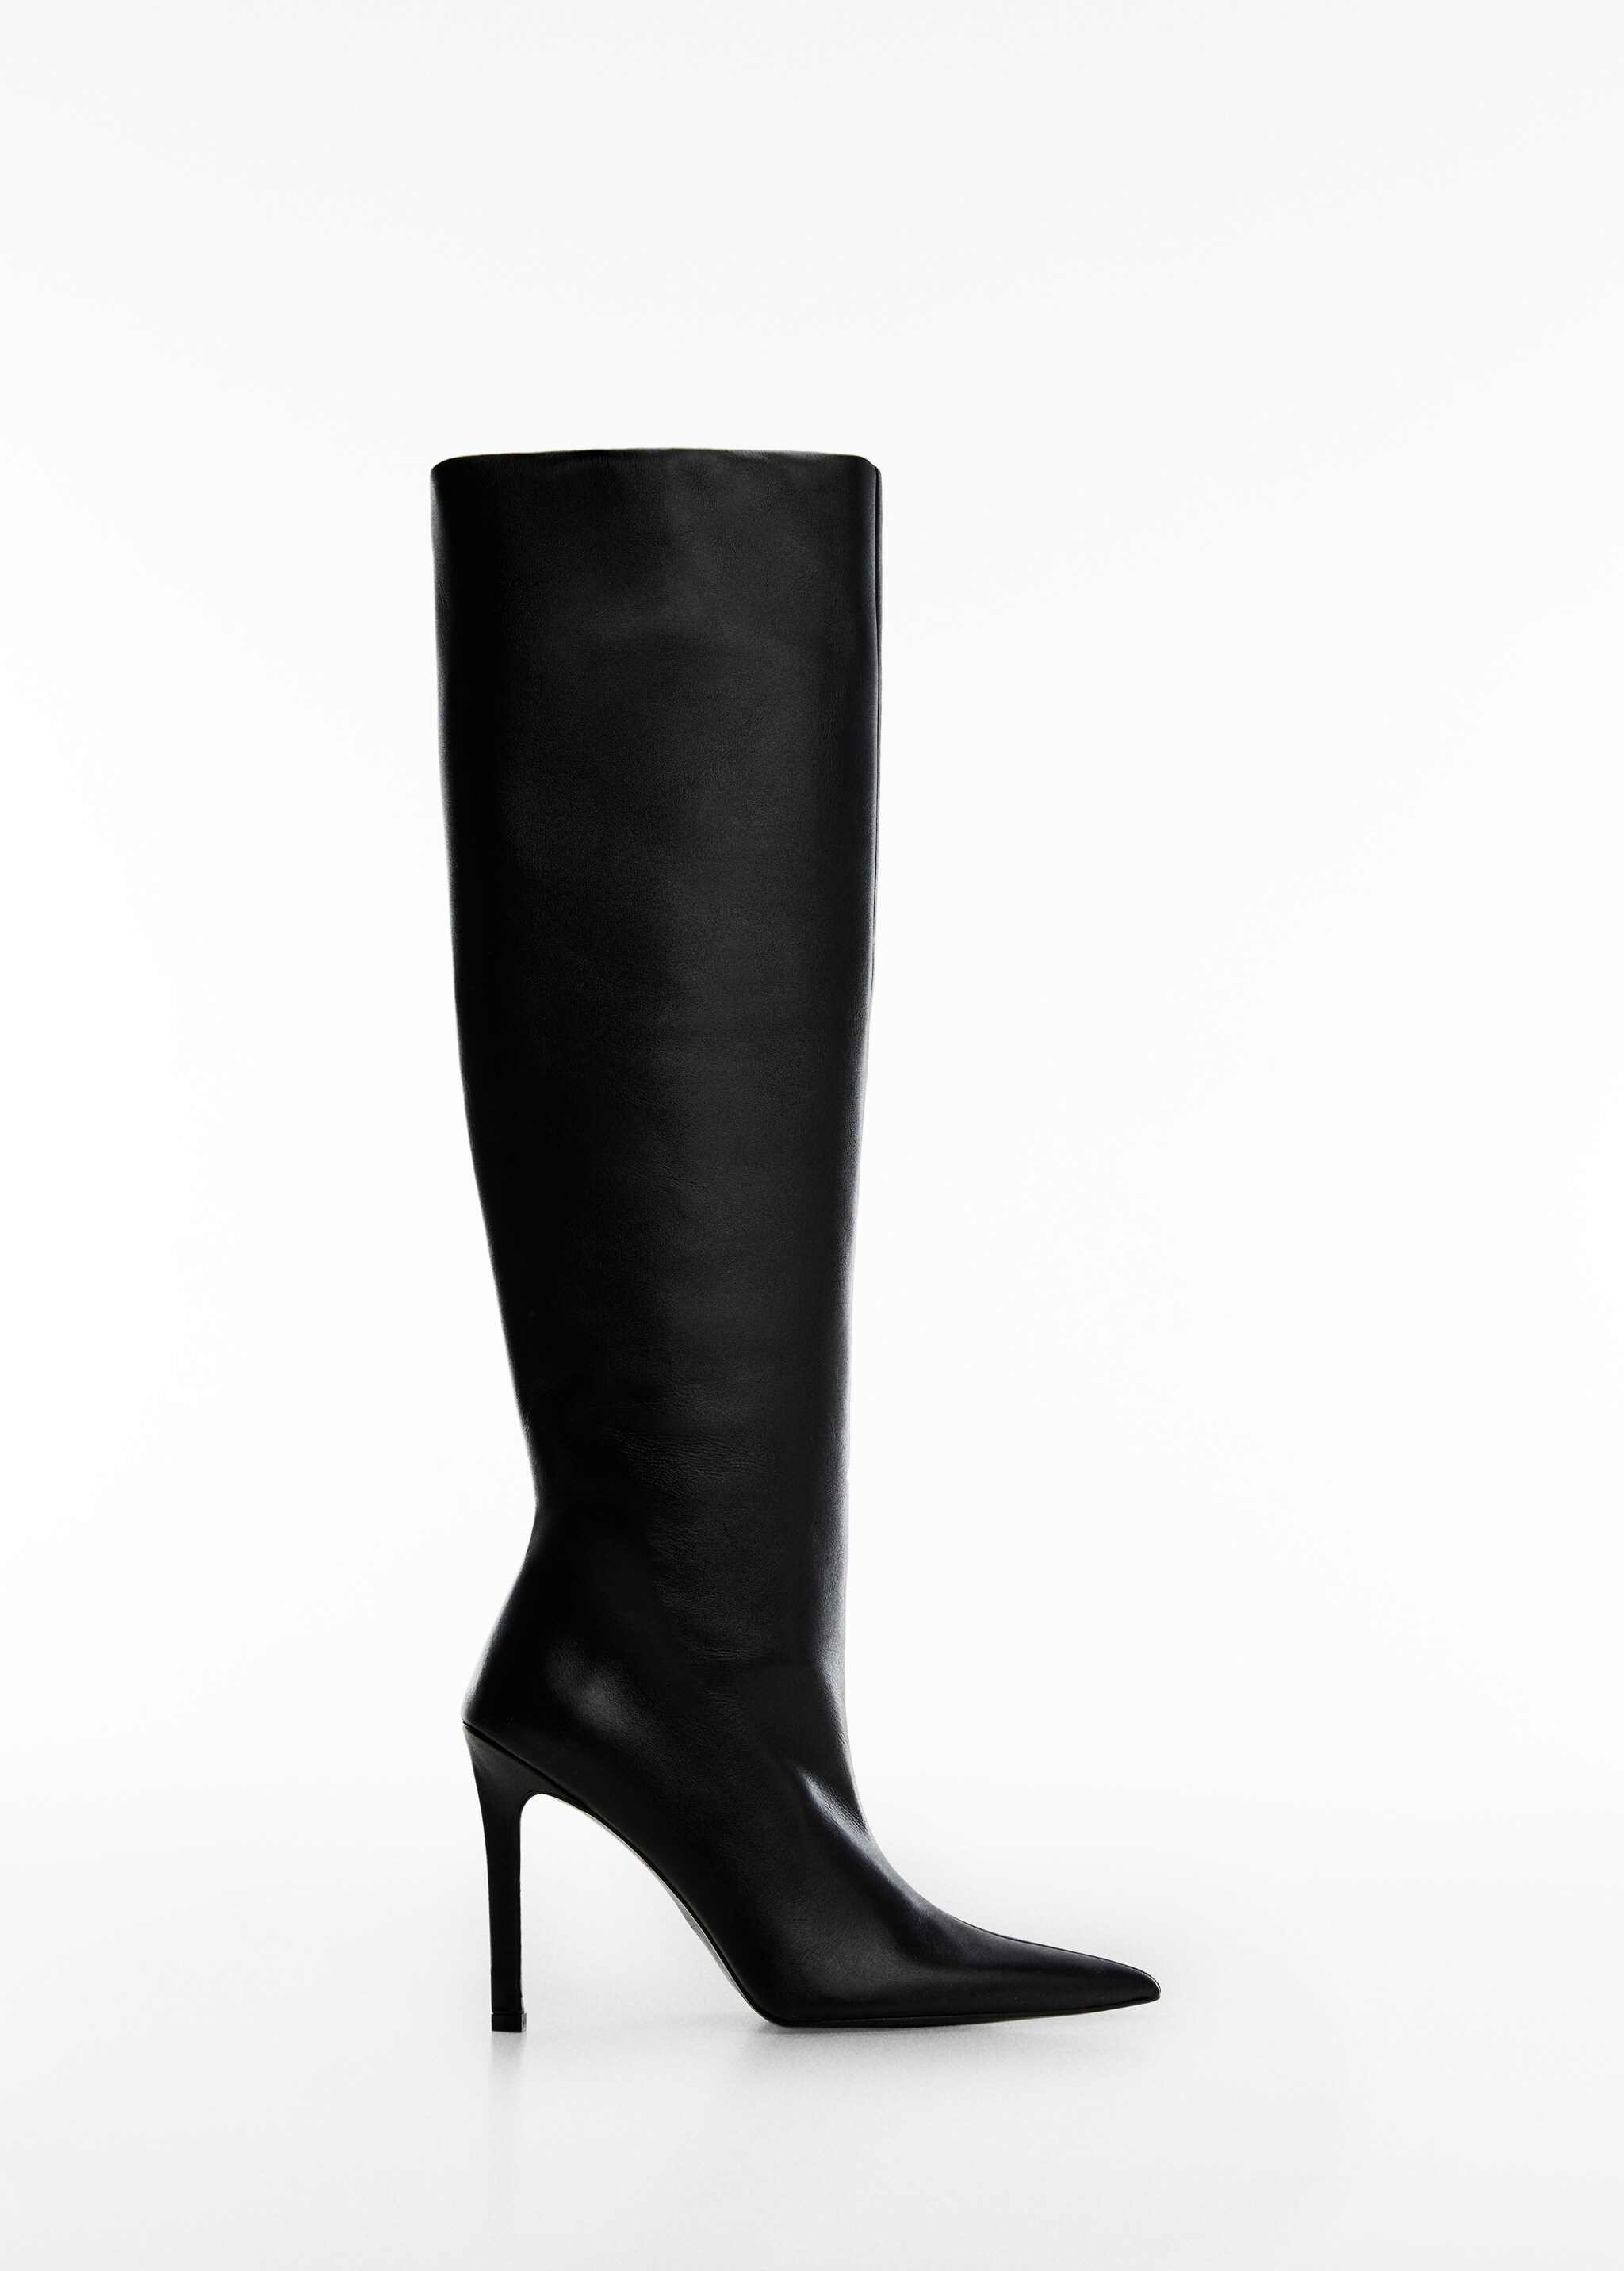 High heel leather boot - Article without model